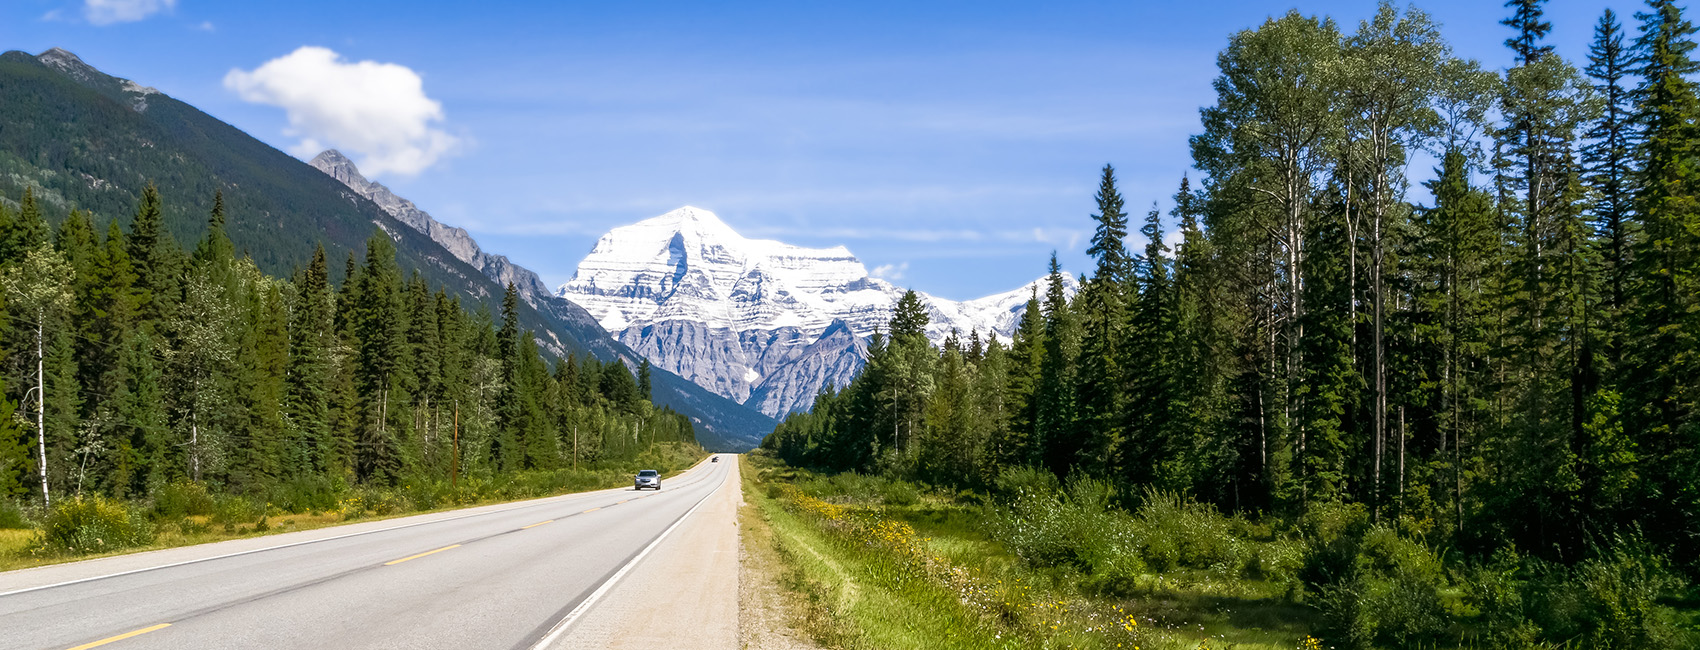 Highway 16 and Mount Robson